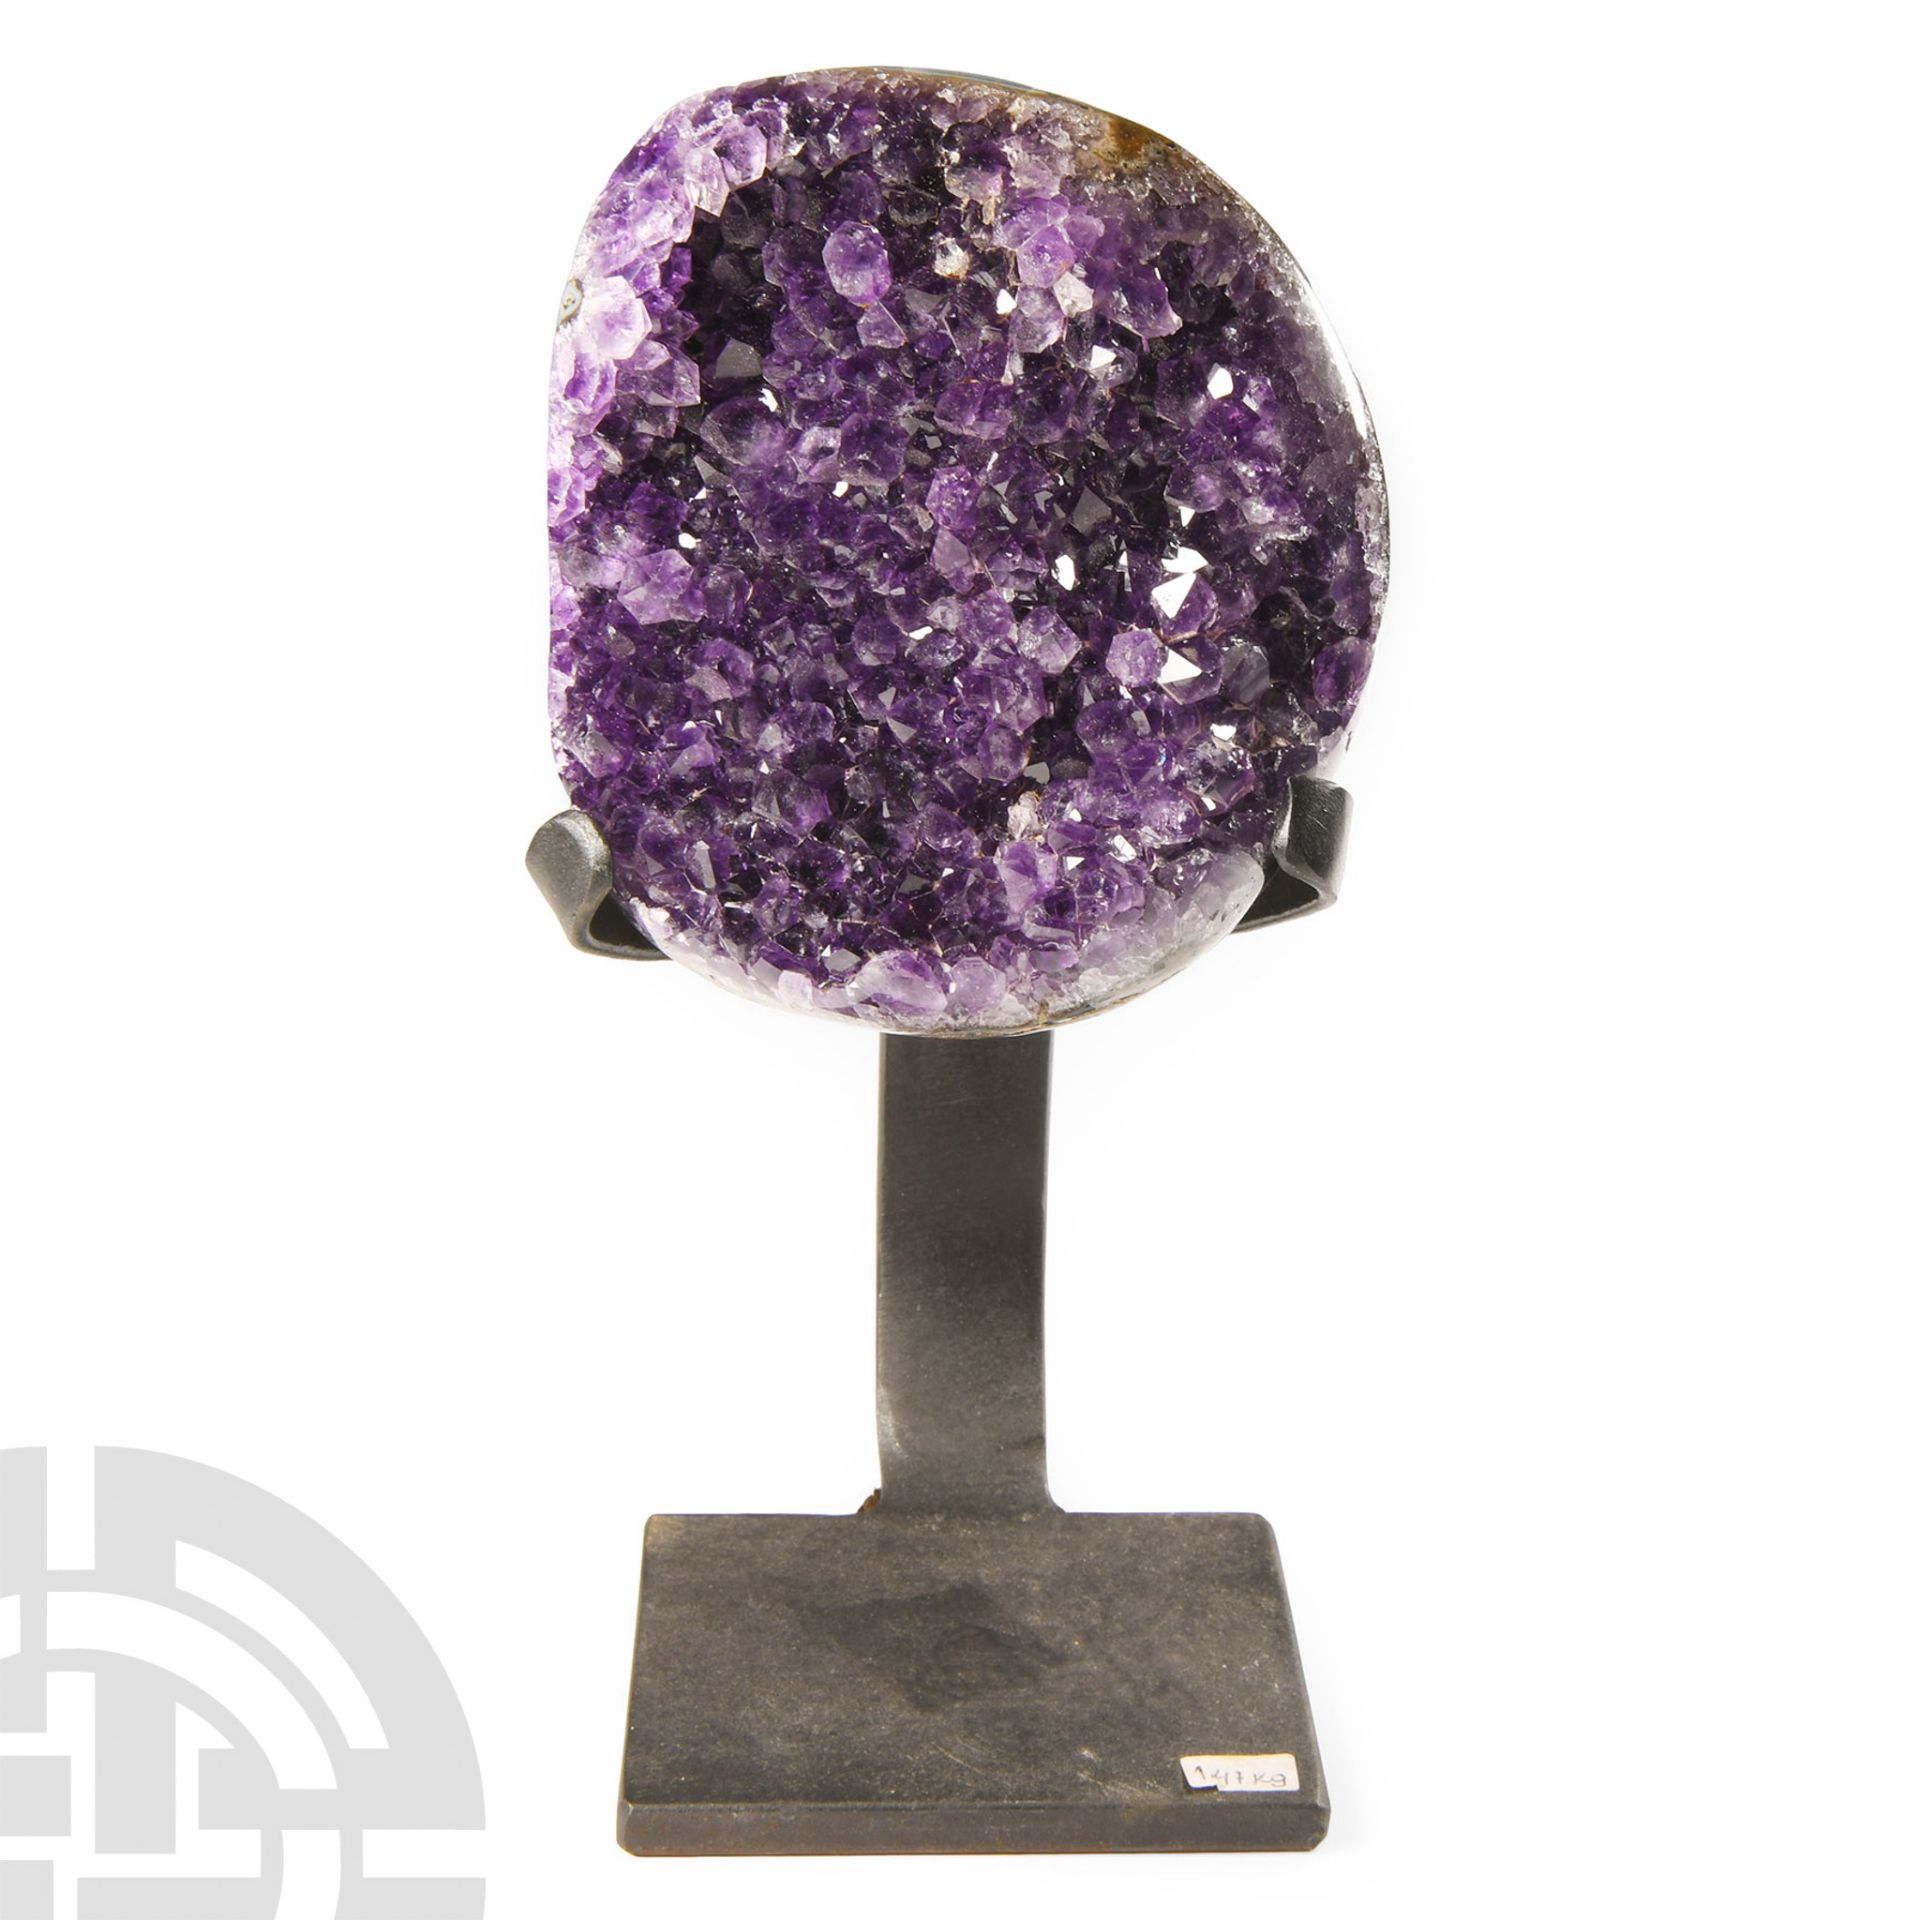 Natural History - Amethyst Crystal Specimen on Stand.